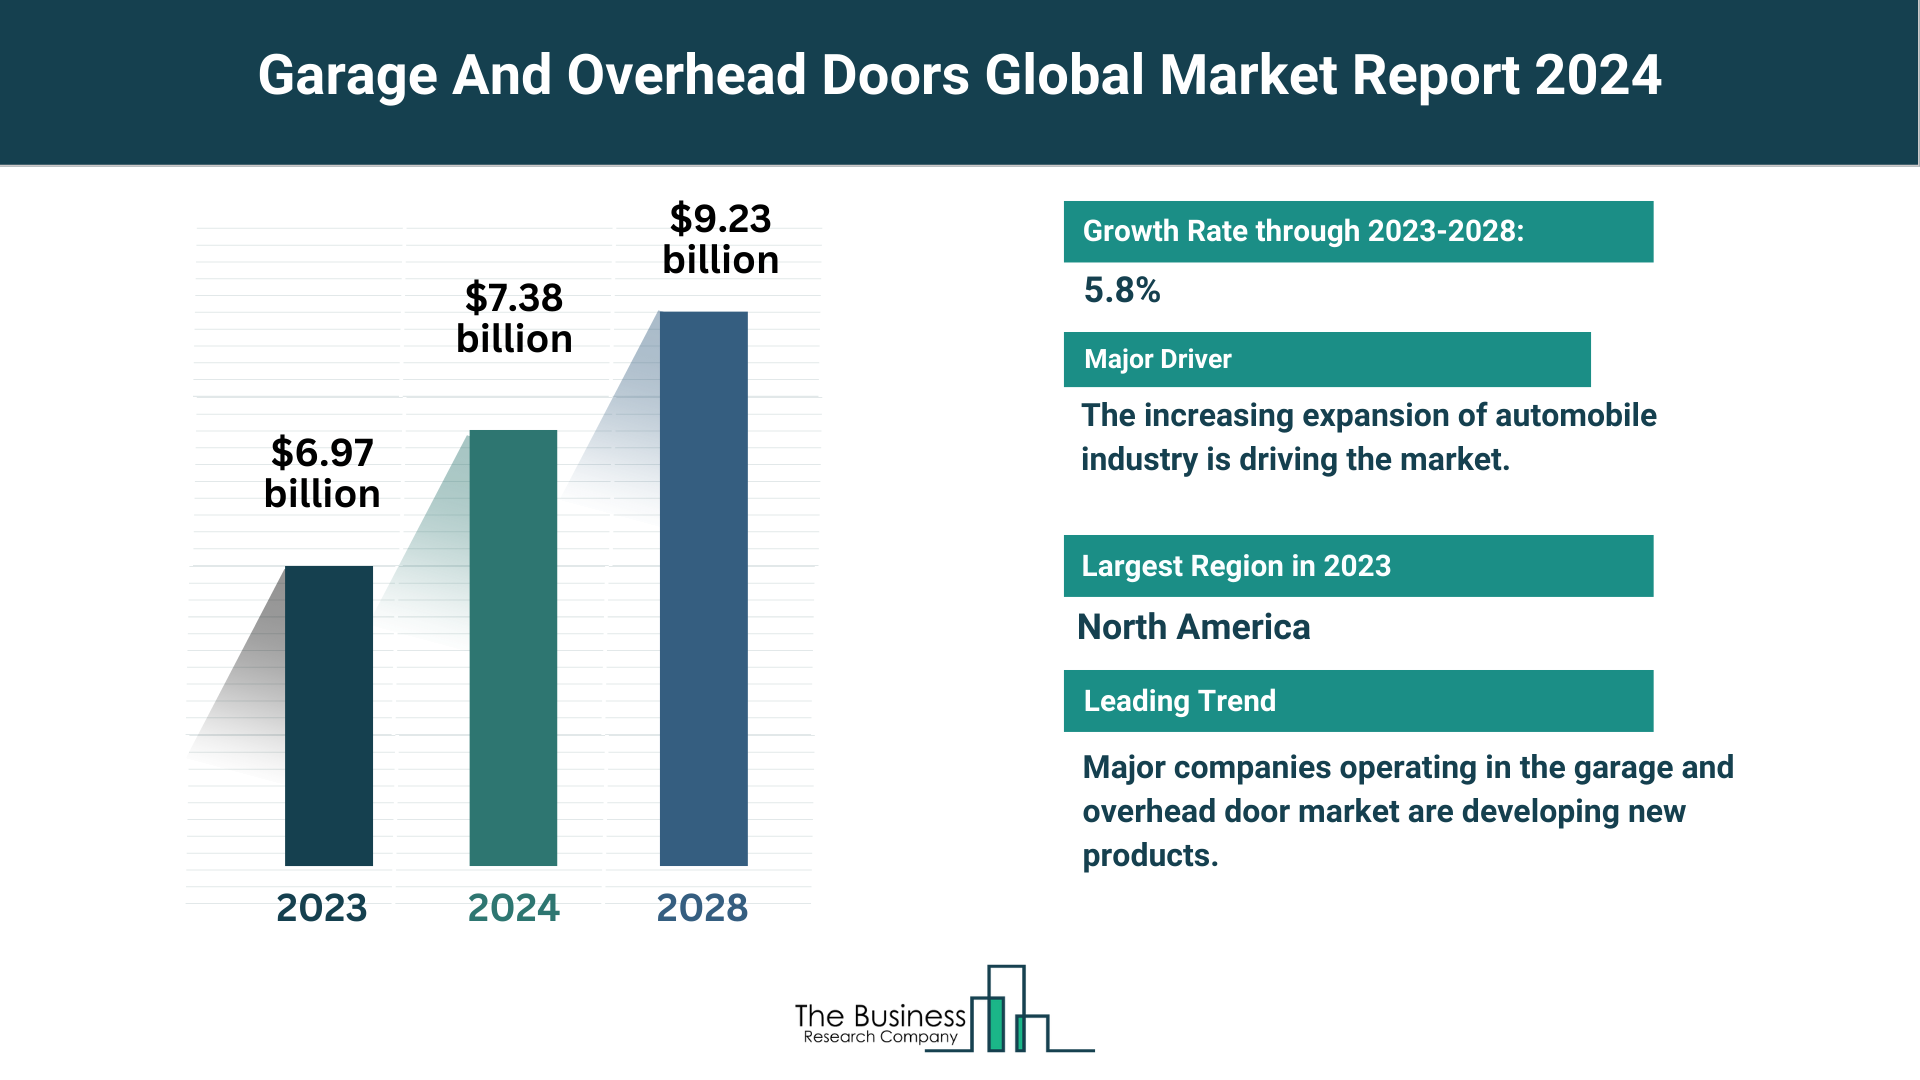 Global Garage And Overhead Doors Market Overview 2024: Size, Drivers, And Trends